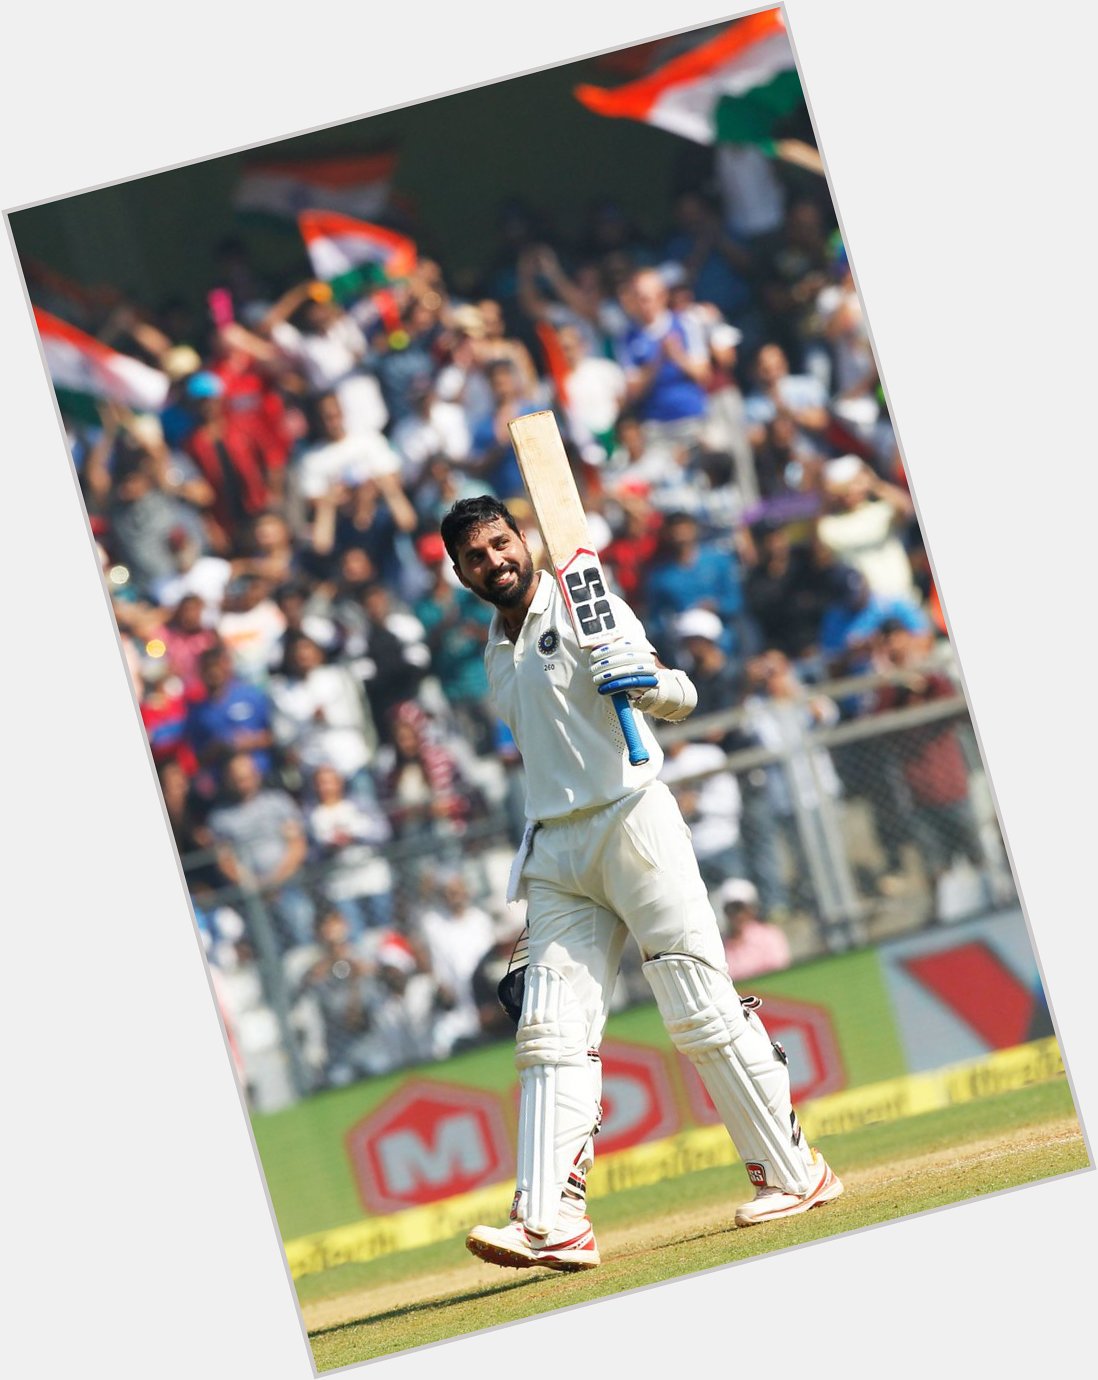 Happy Birthday Murali Vijay. The 2nd best Indian Test opener after Virendra Sehwag. 